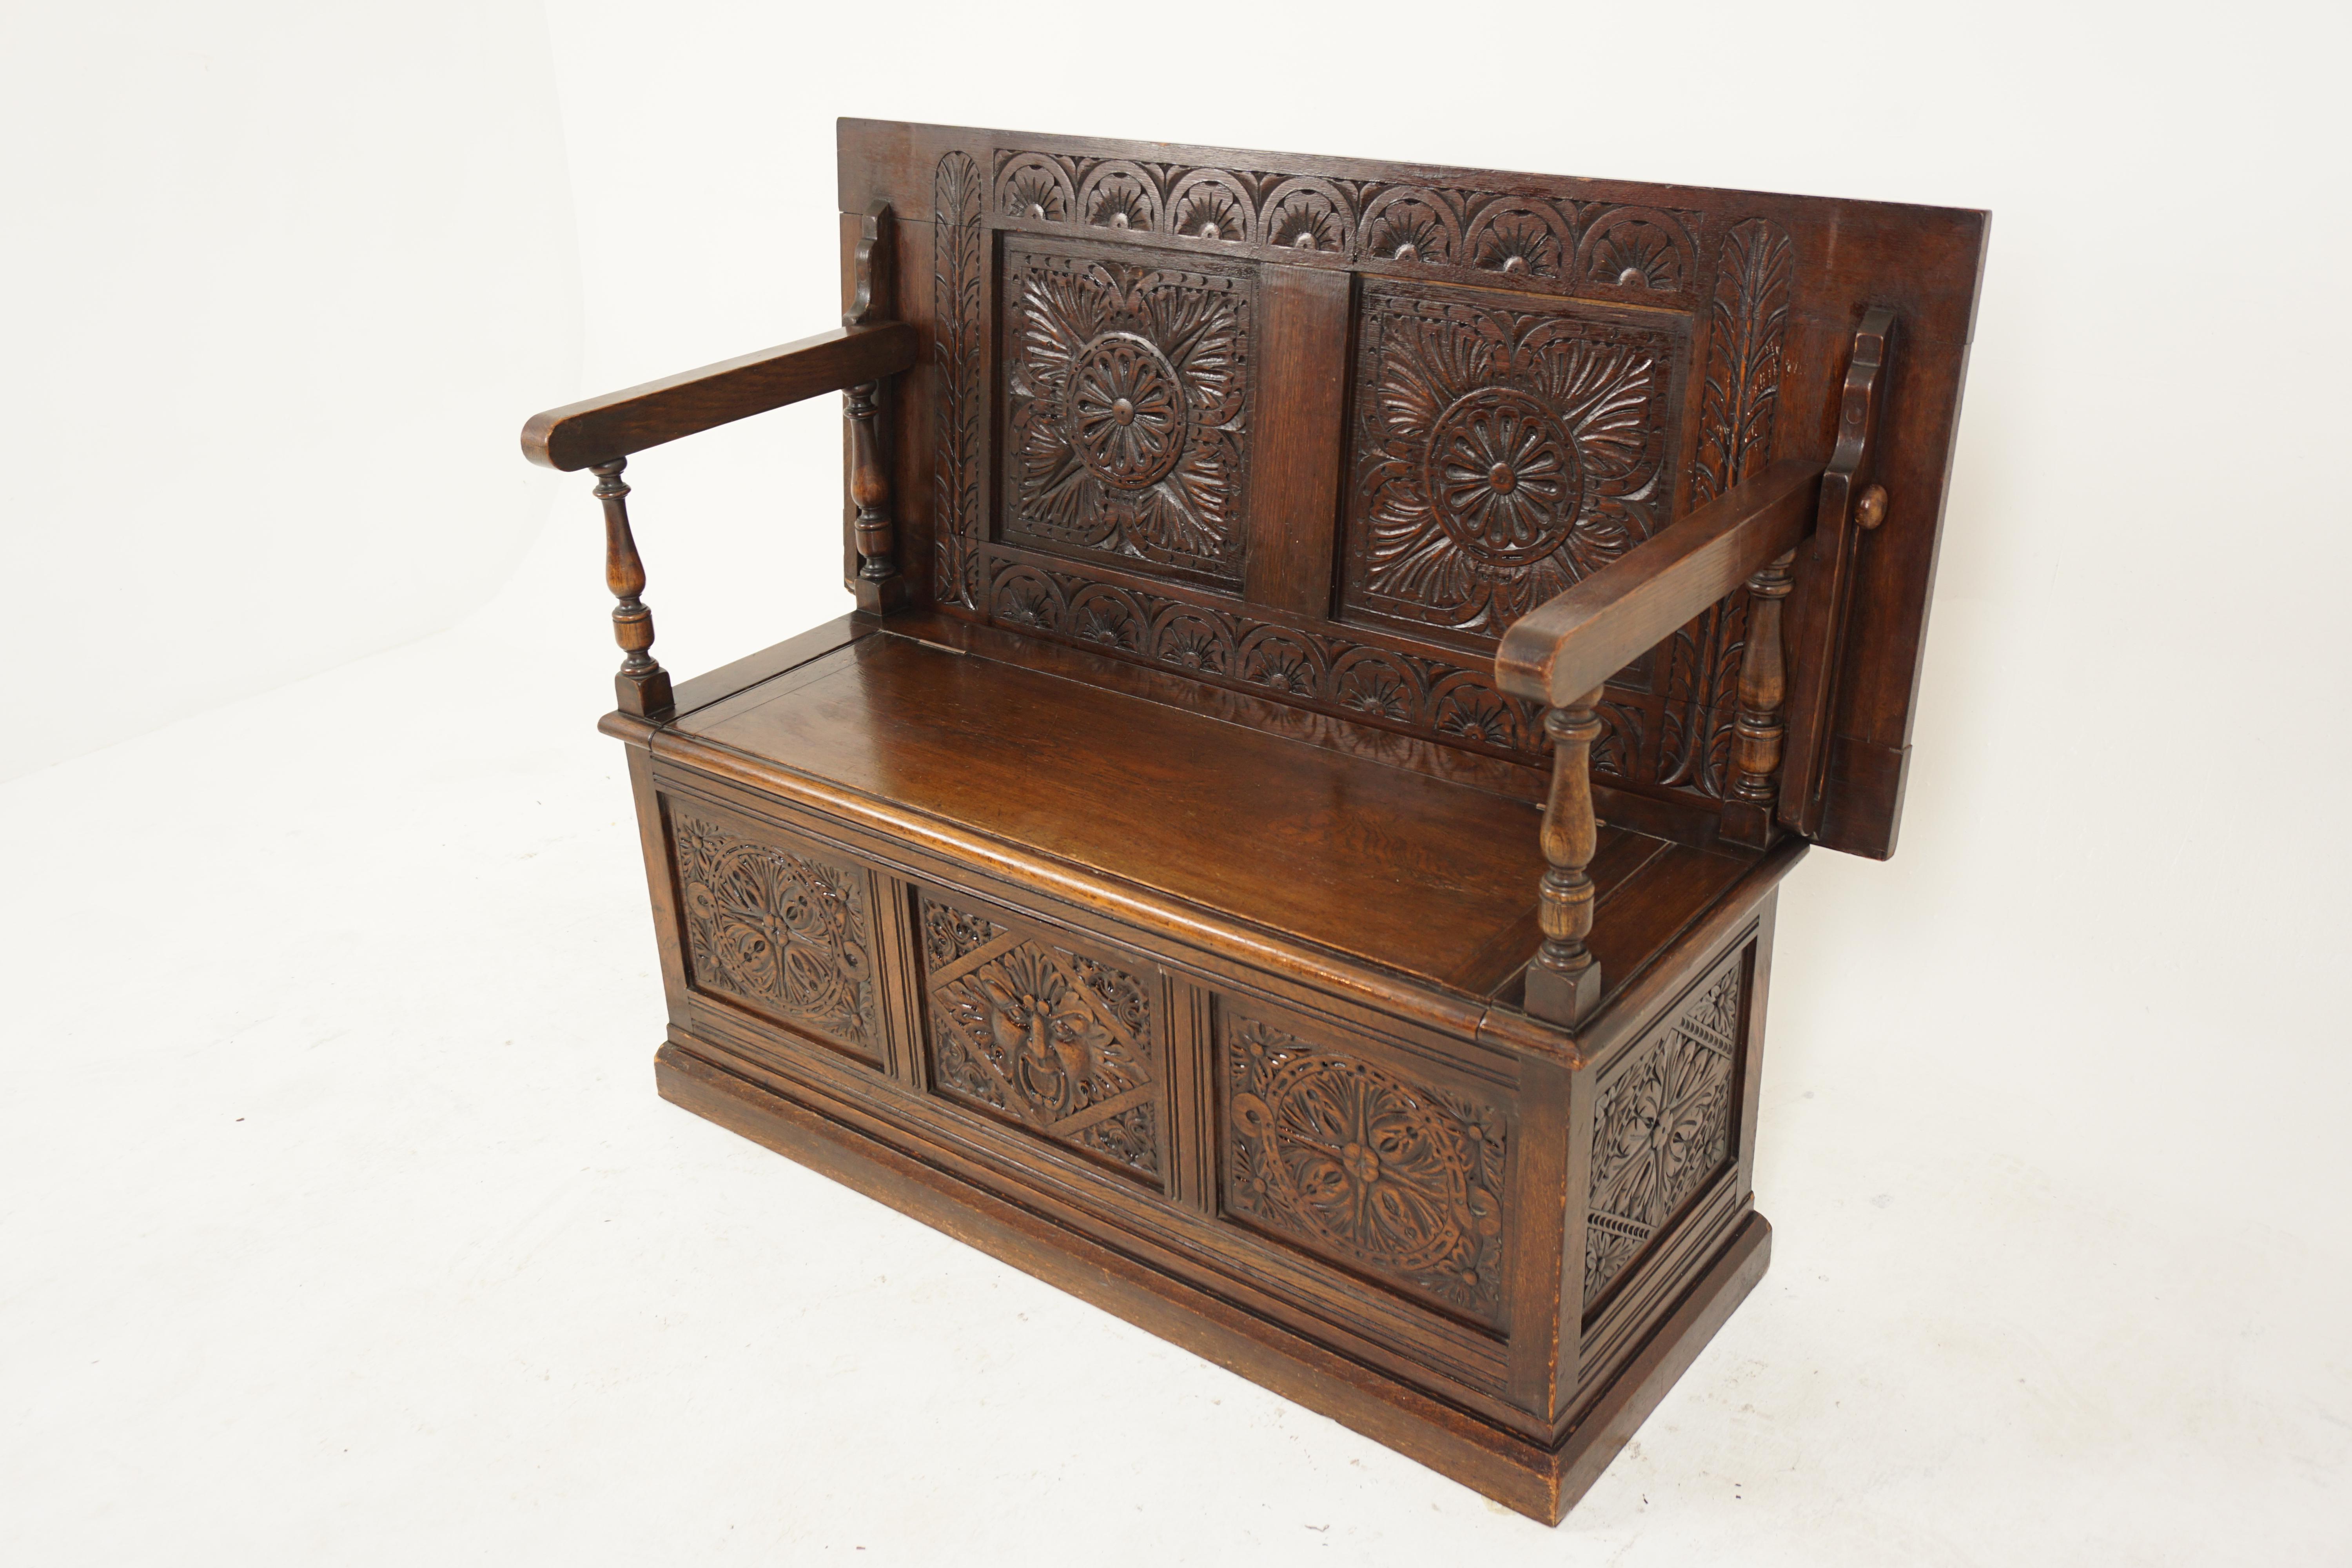 Antique Victorian Gothic Style Green Man Oak Monks Bench Hall Seat, Scotland 1890, H785

England 1890
Solid Oak 
Original Finish 
With a heavily carved back
Supported by oak supports and arm rests
The back folds down to form a table
This has